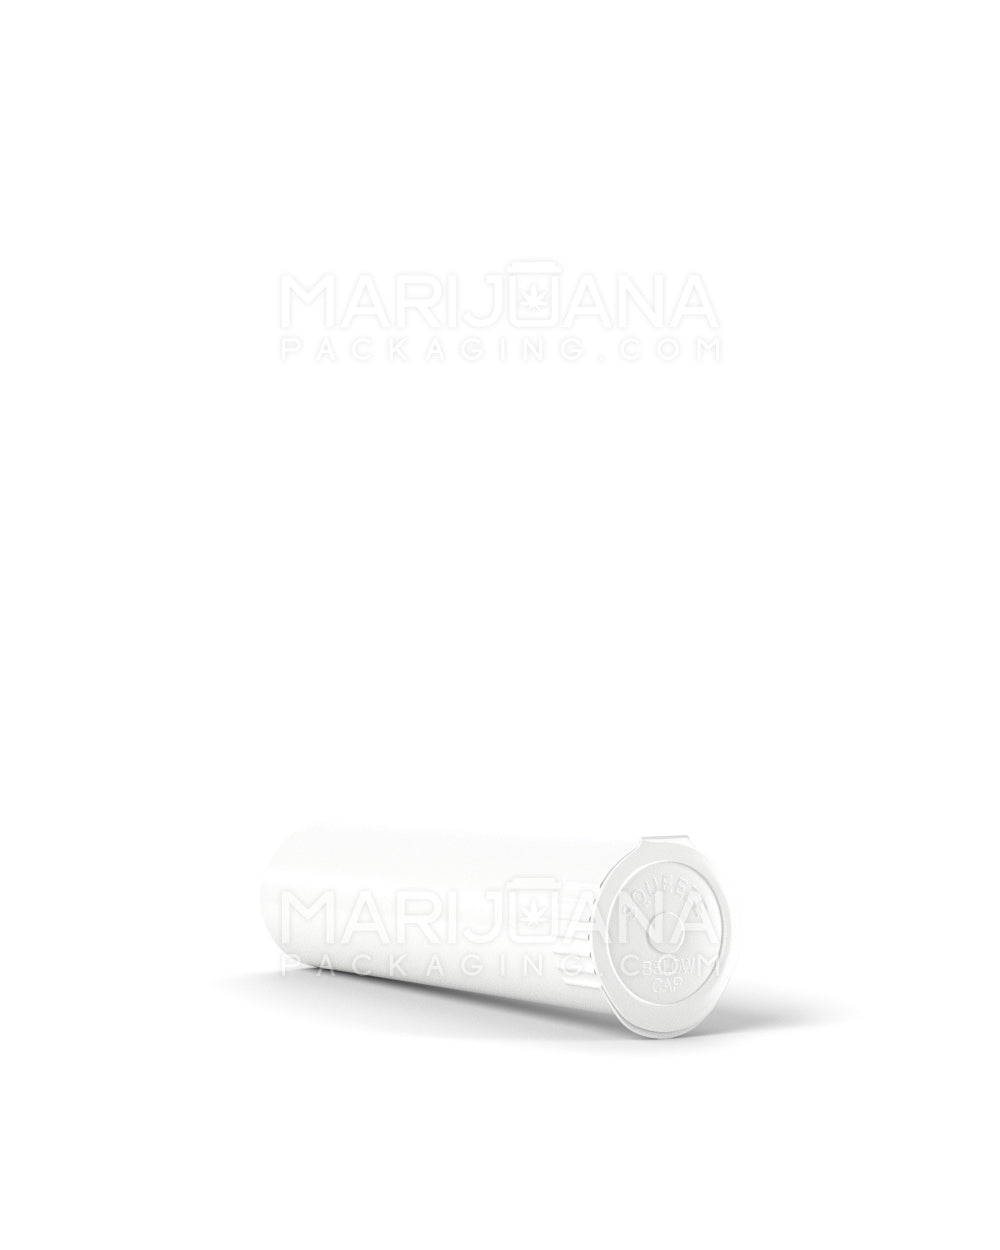 Child Resistant | Pop Top Opaque Plastic Pre-Roll Tubes | 78mm - White - 1200 Count - 5